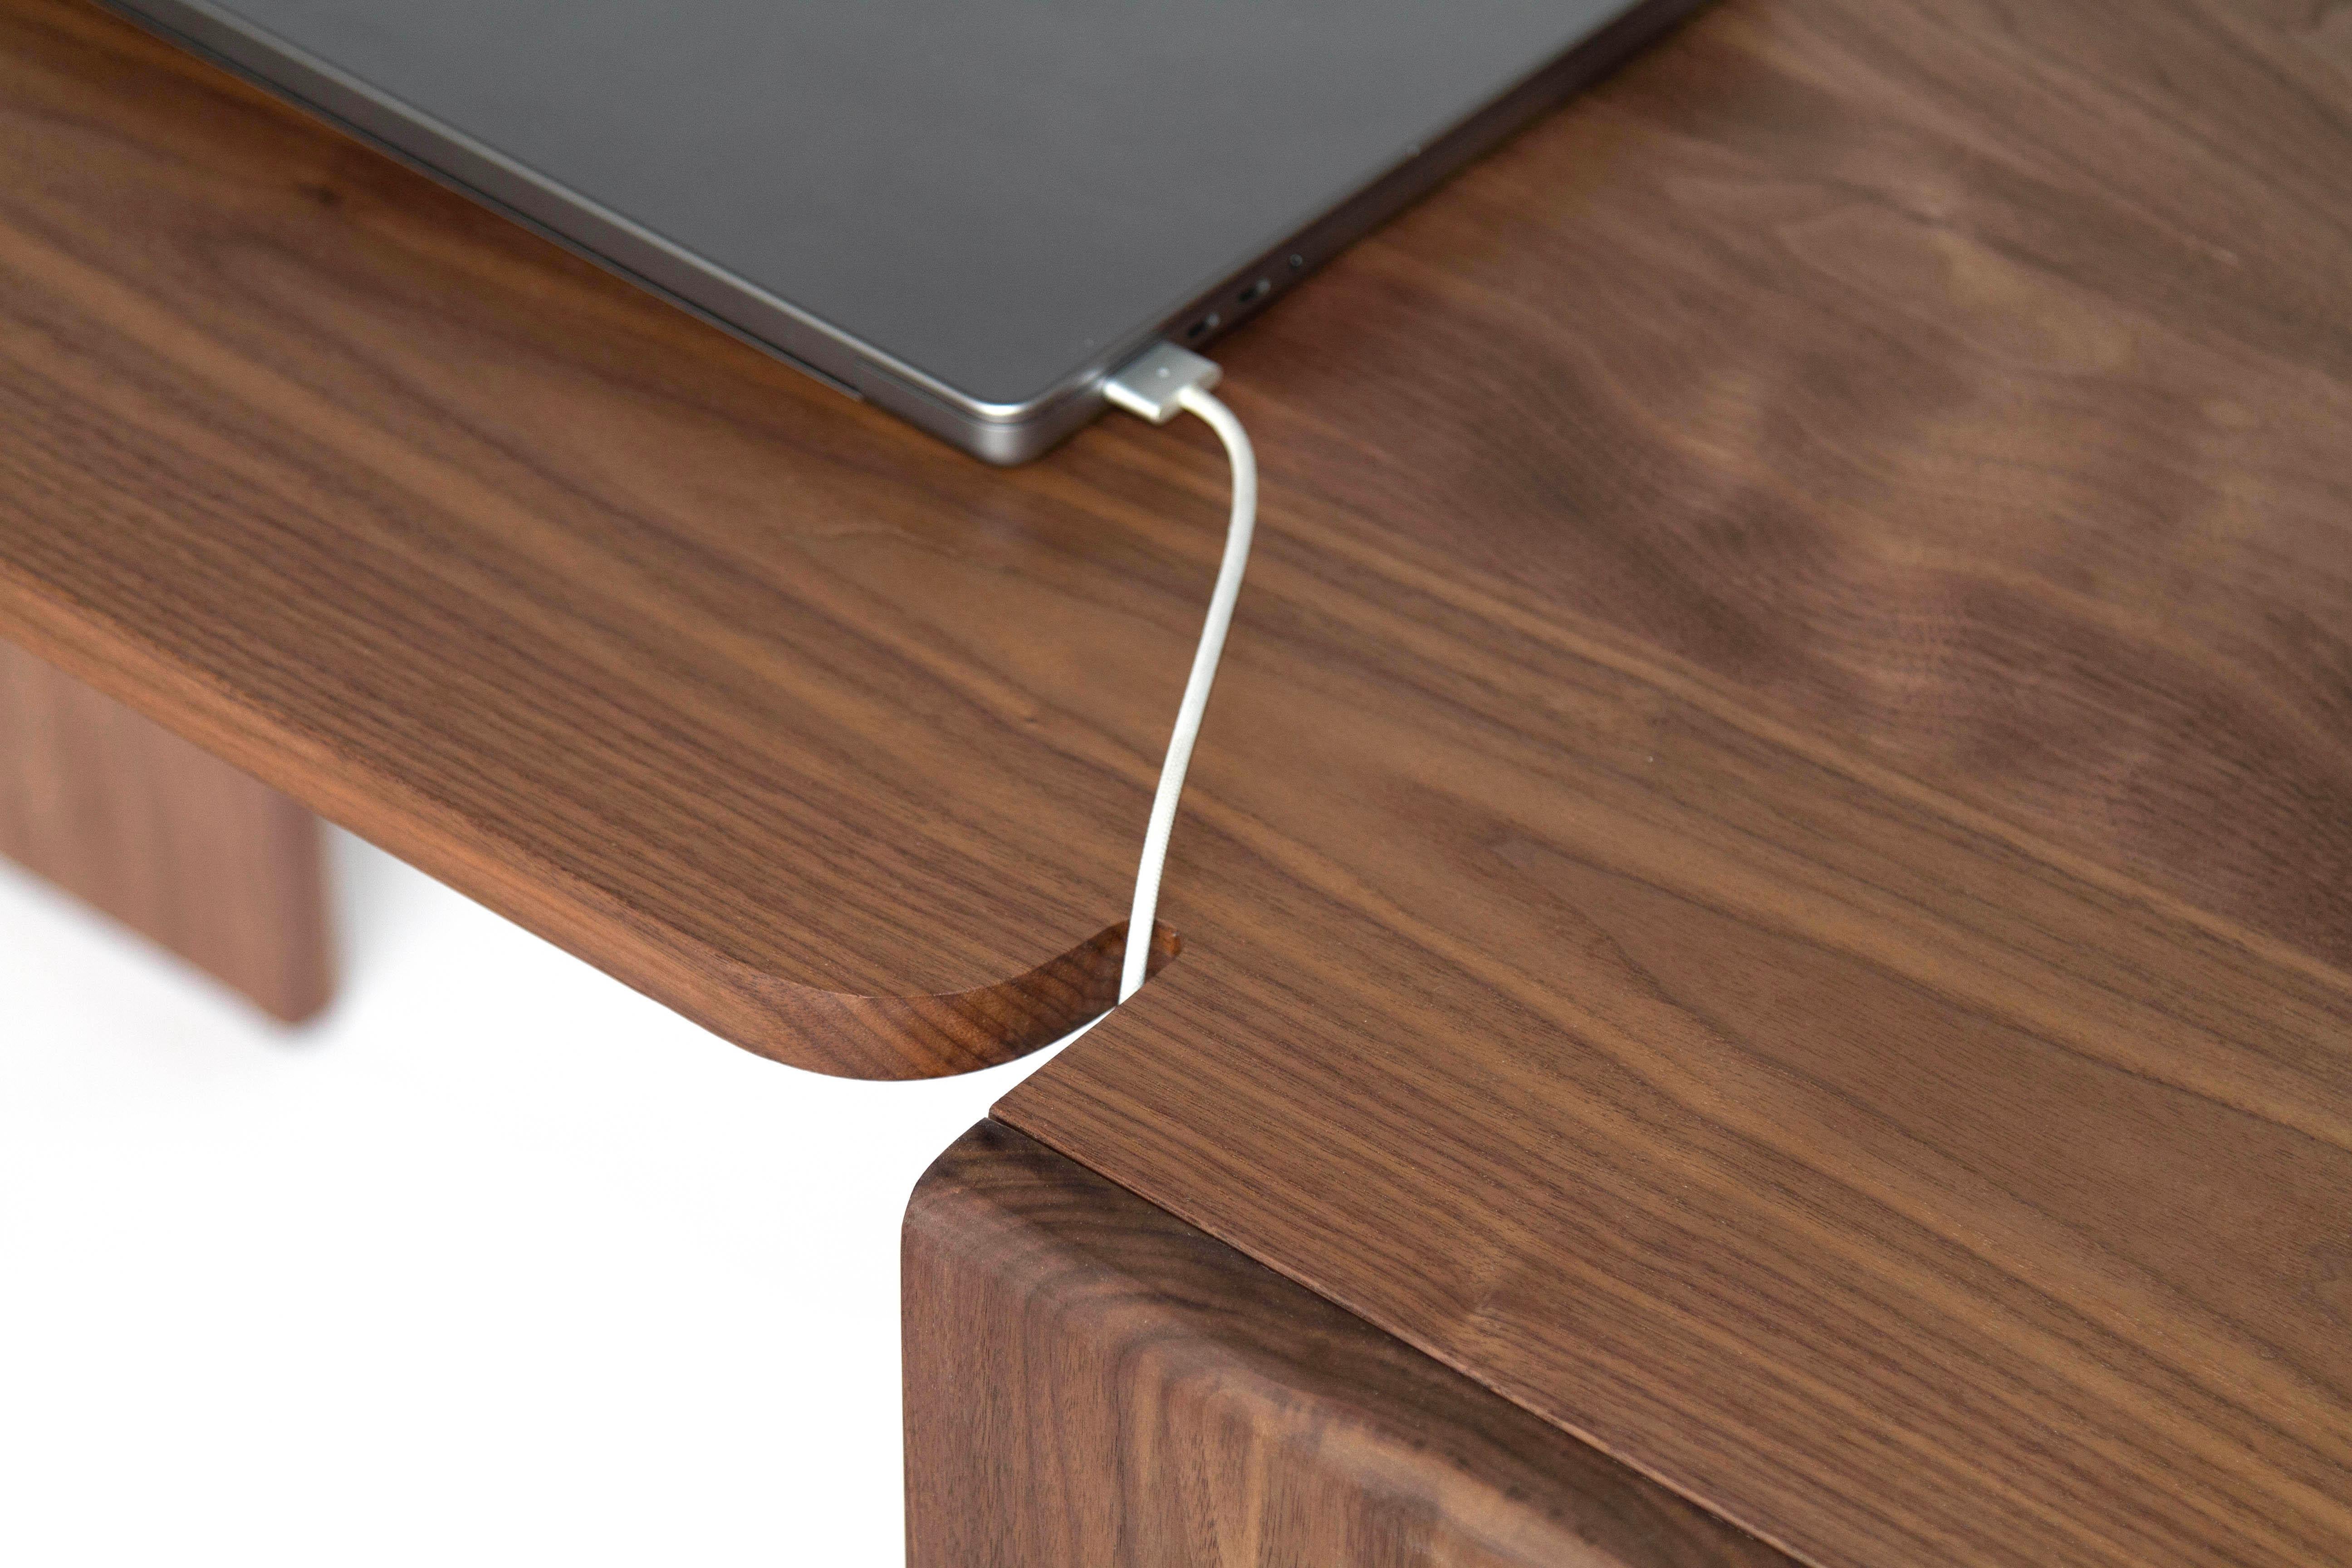 Minimalist desk with surprising details like grooves for cables and different-width legs. 